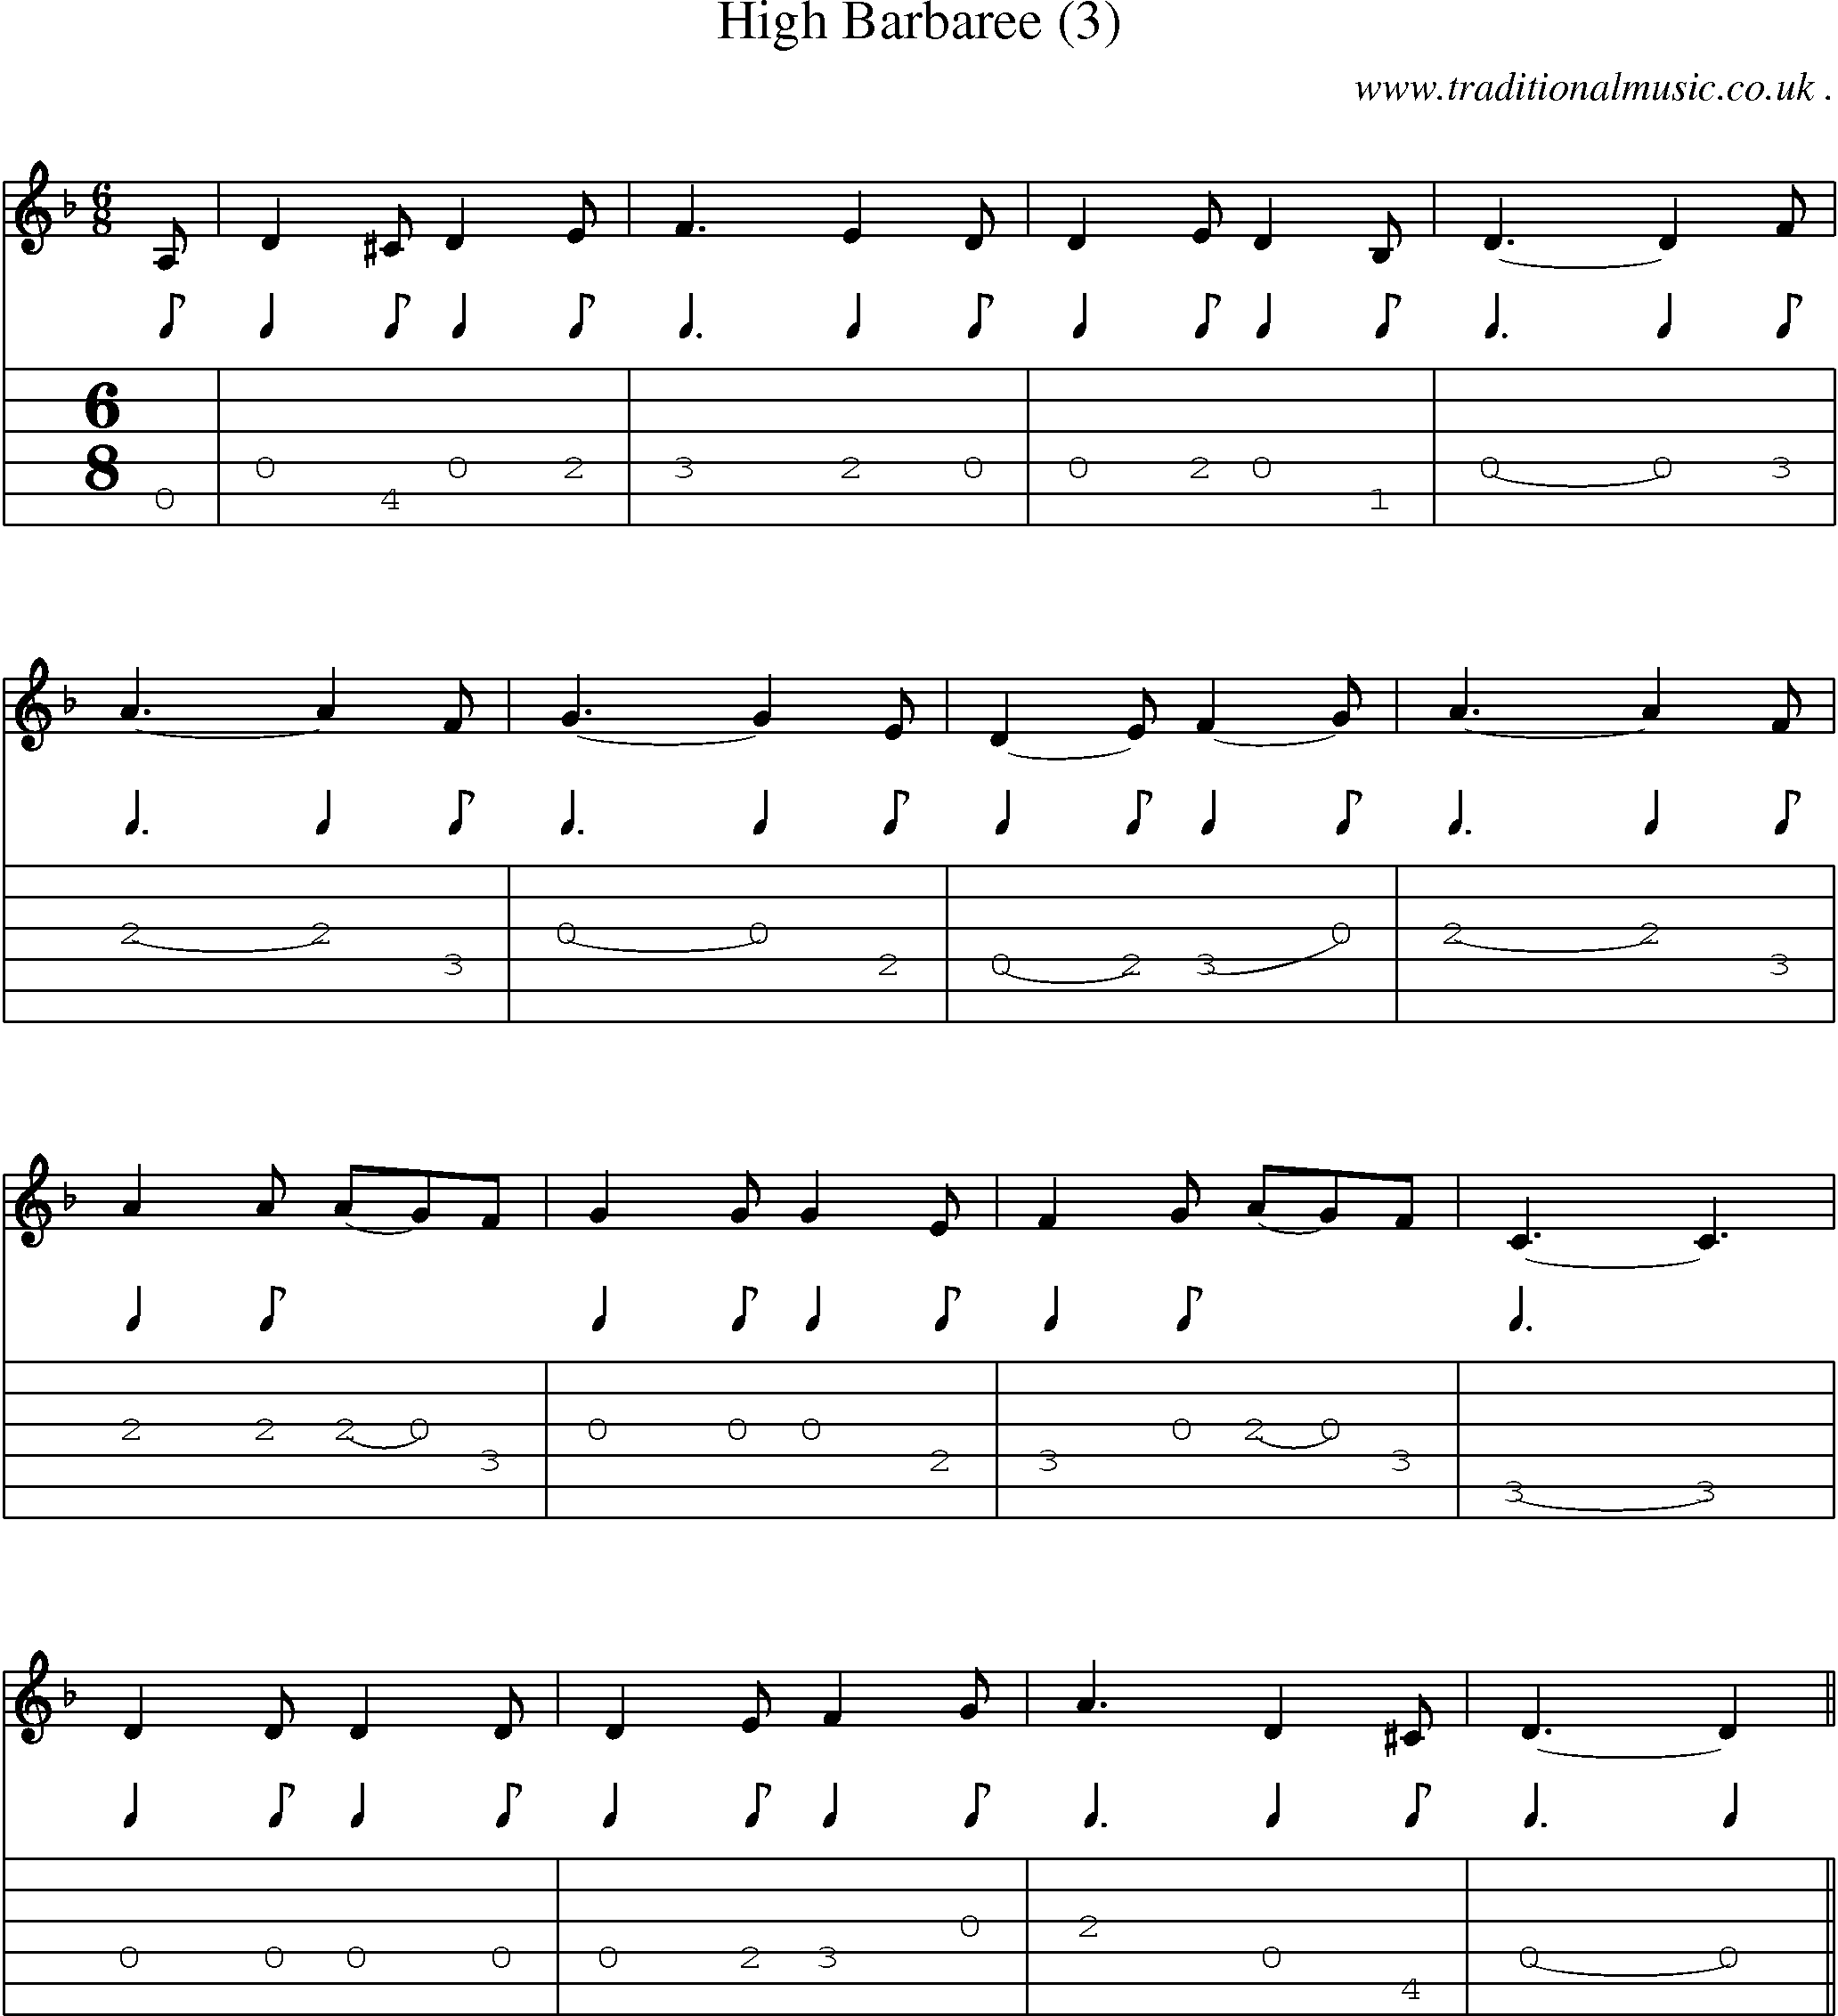 Sheet-Music and Guitar Tabs for High Barbaree (3)